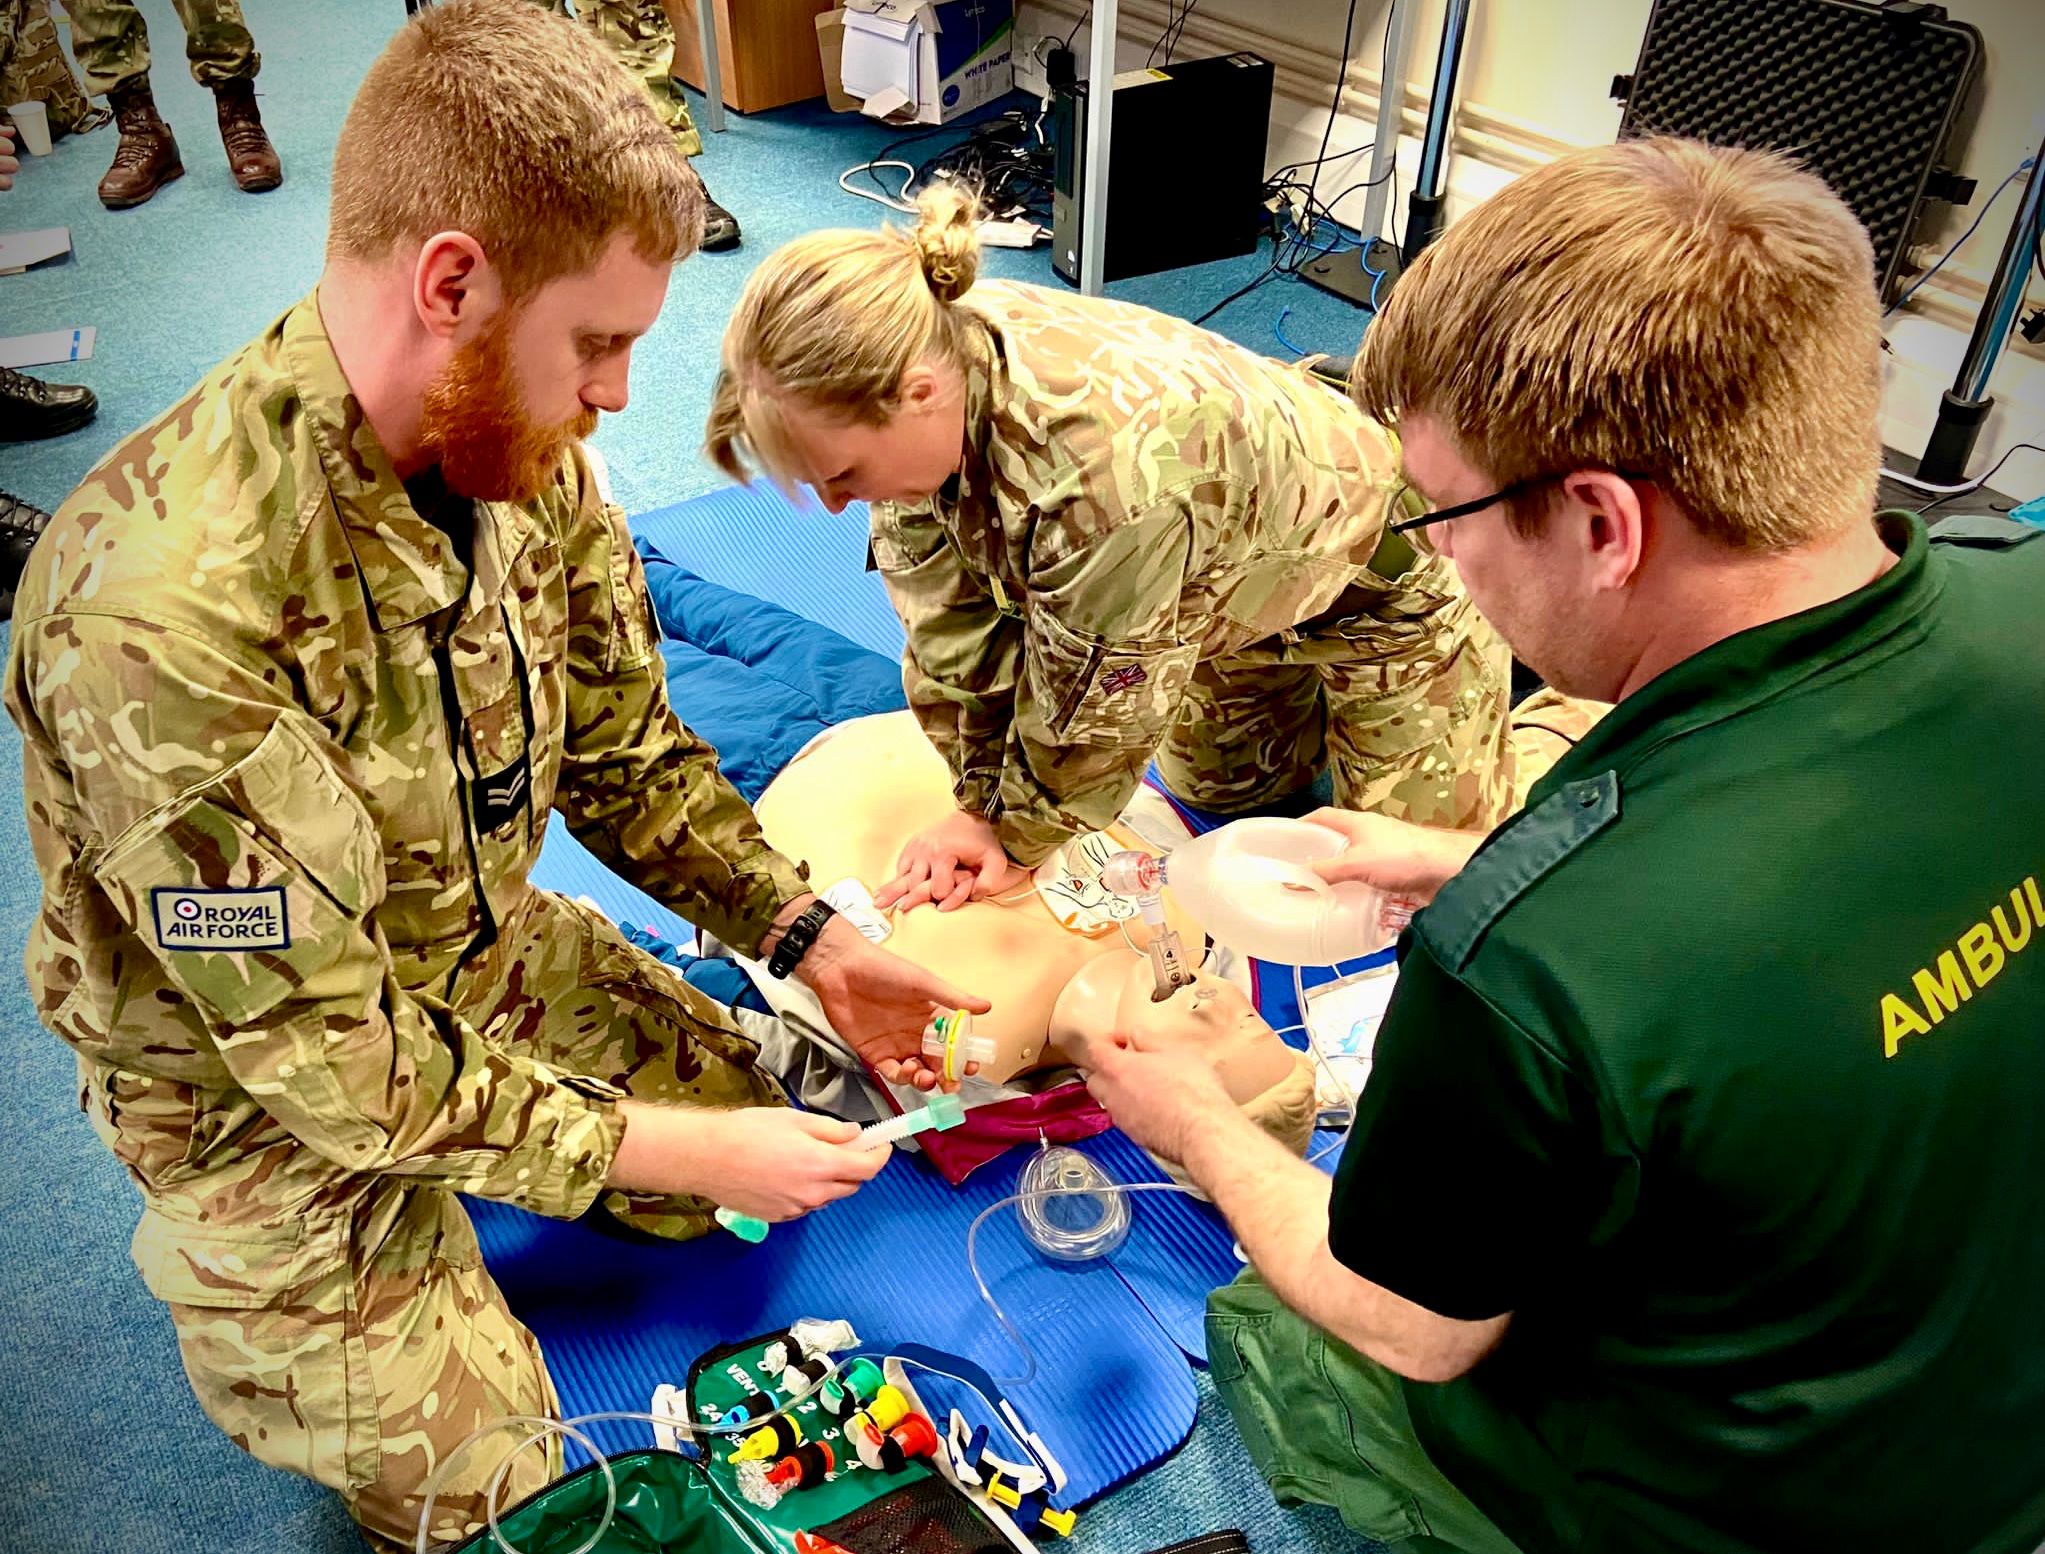 Image shows RAF Personnel and ambulance staff giving chest compressions to dummy in improvised classroom training scenario.